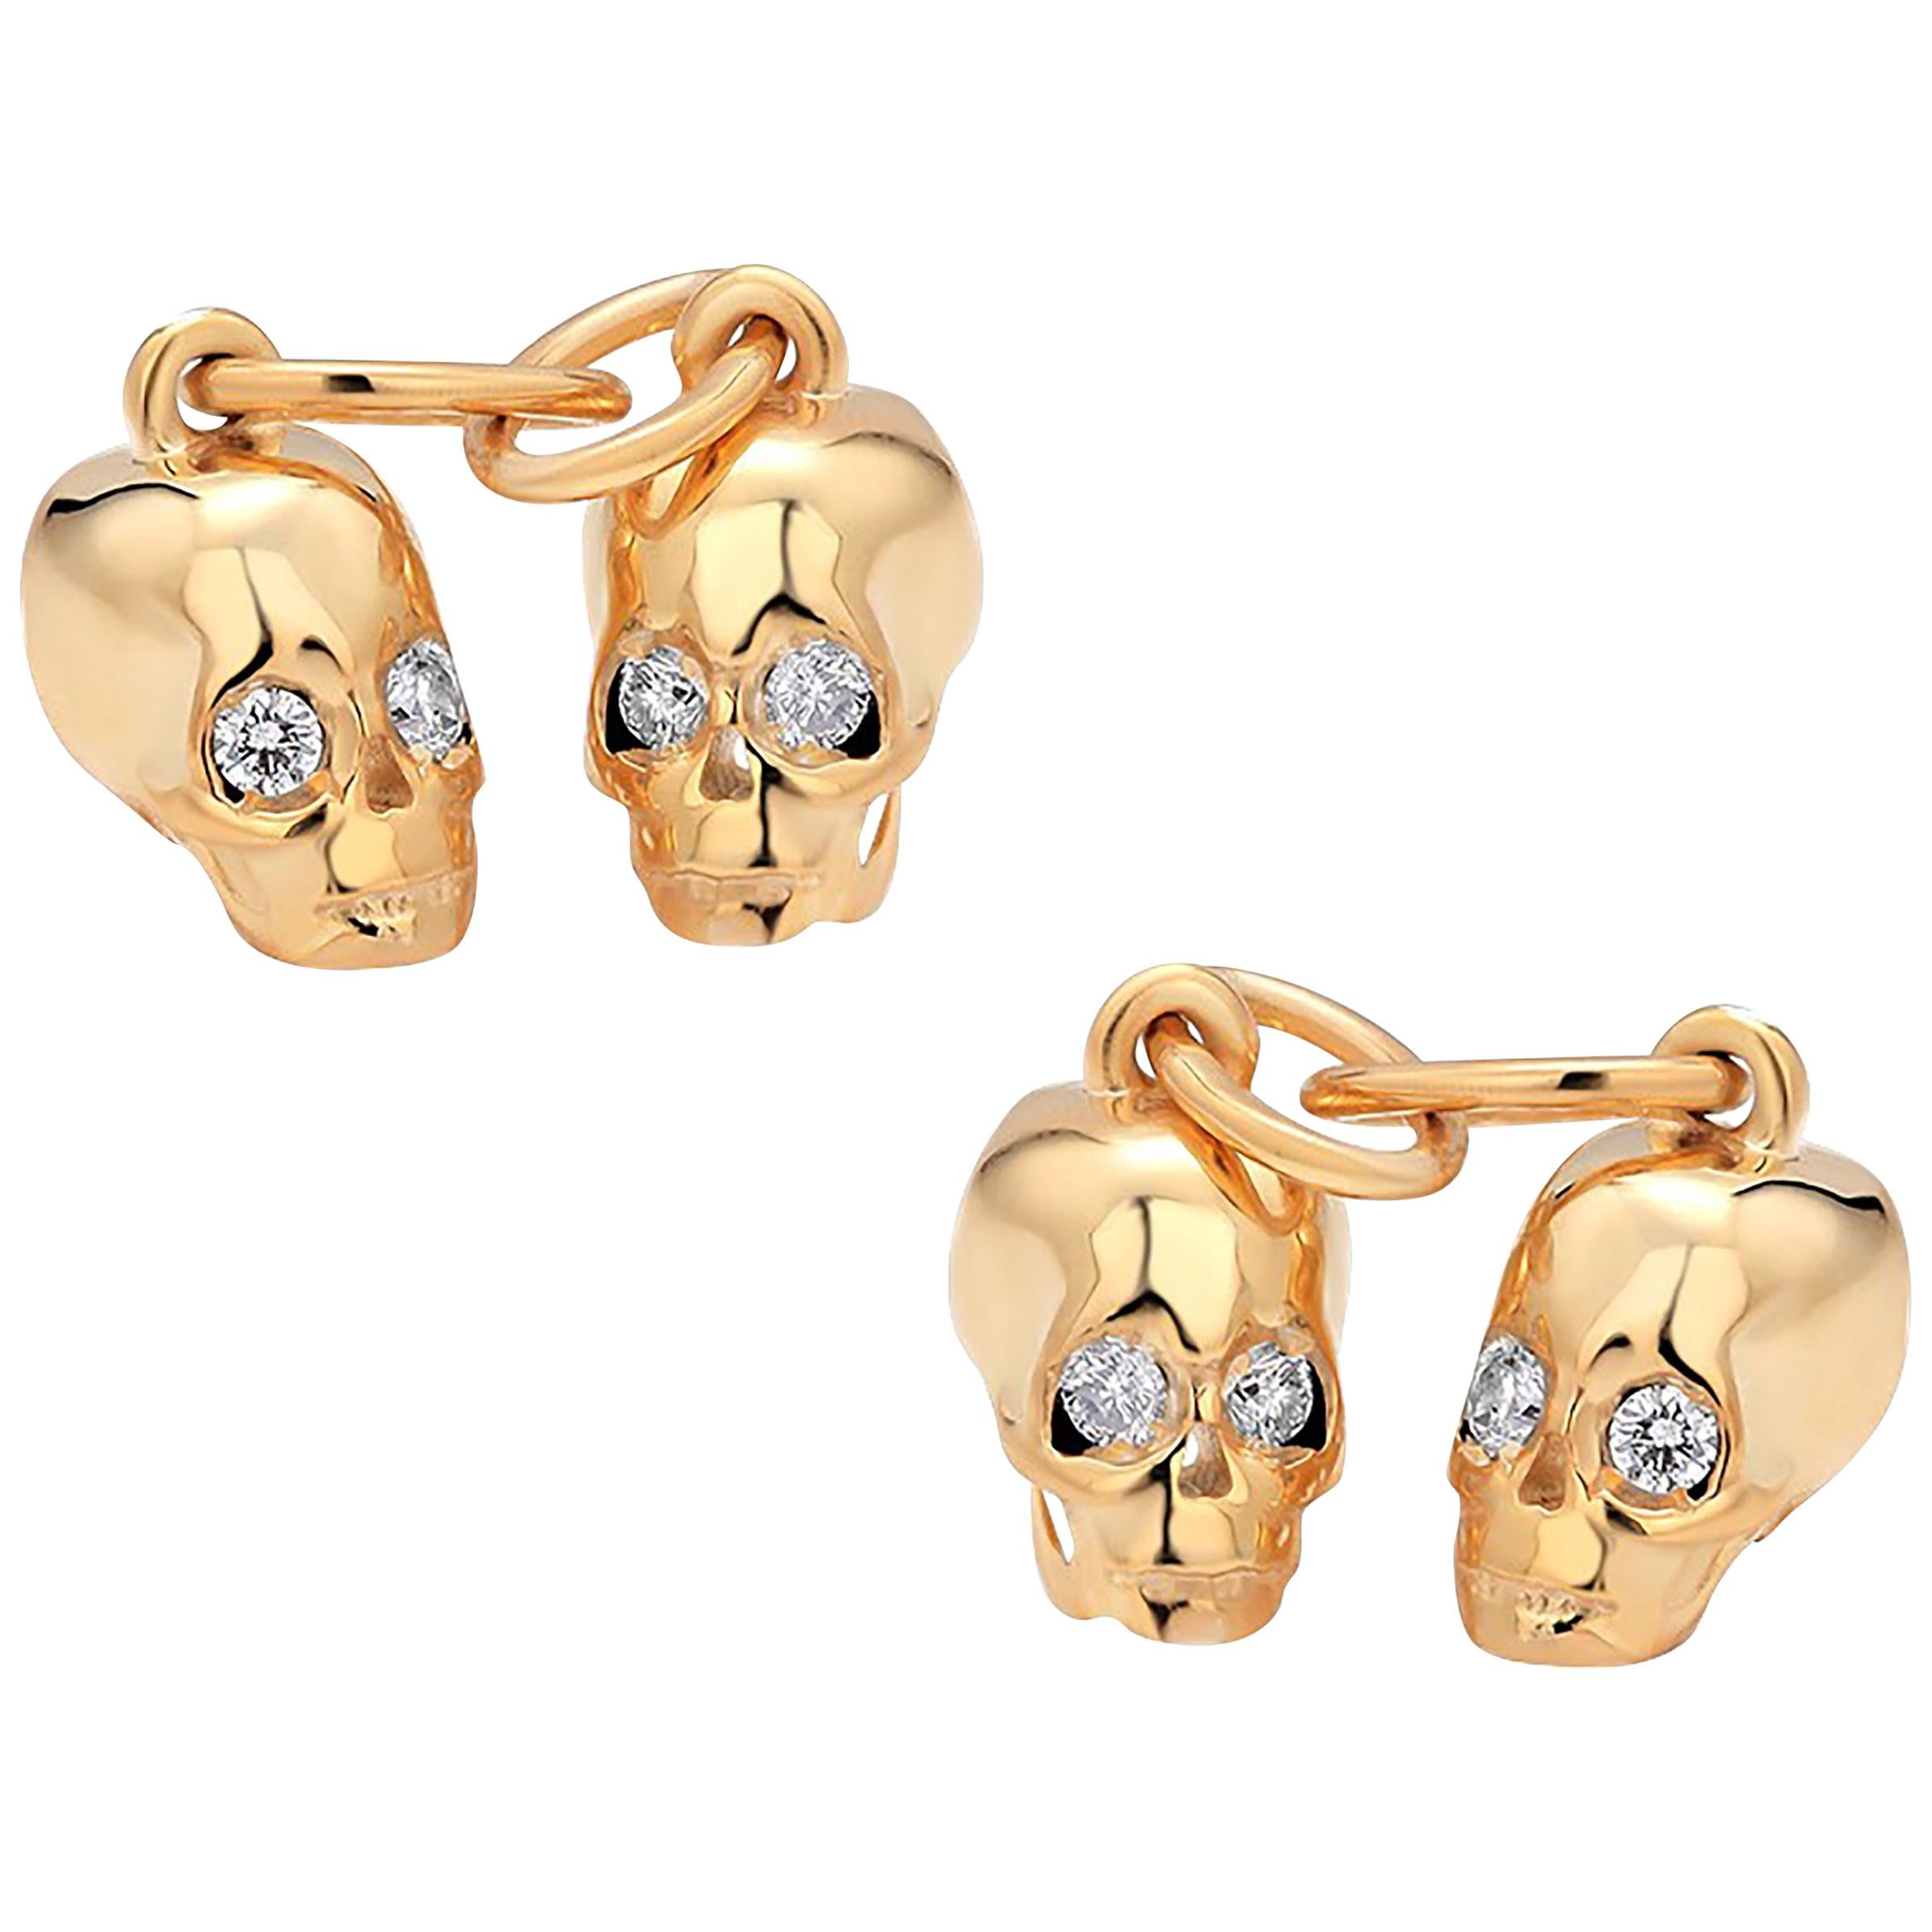 Genuine Diamond Skull Charms Double Sided Silver Cufflinks Yellow Gold-Plated